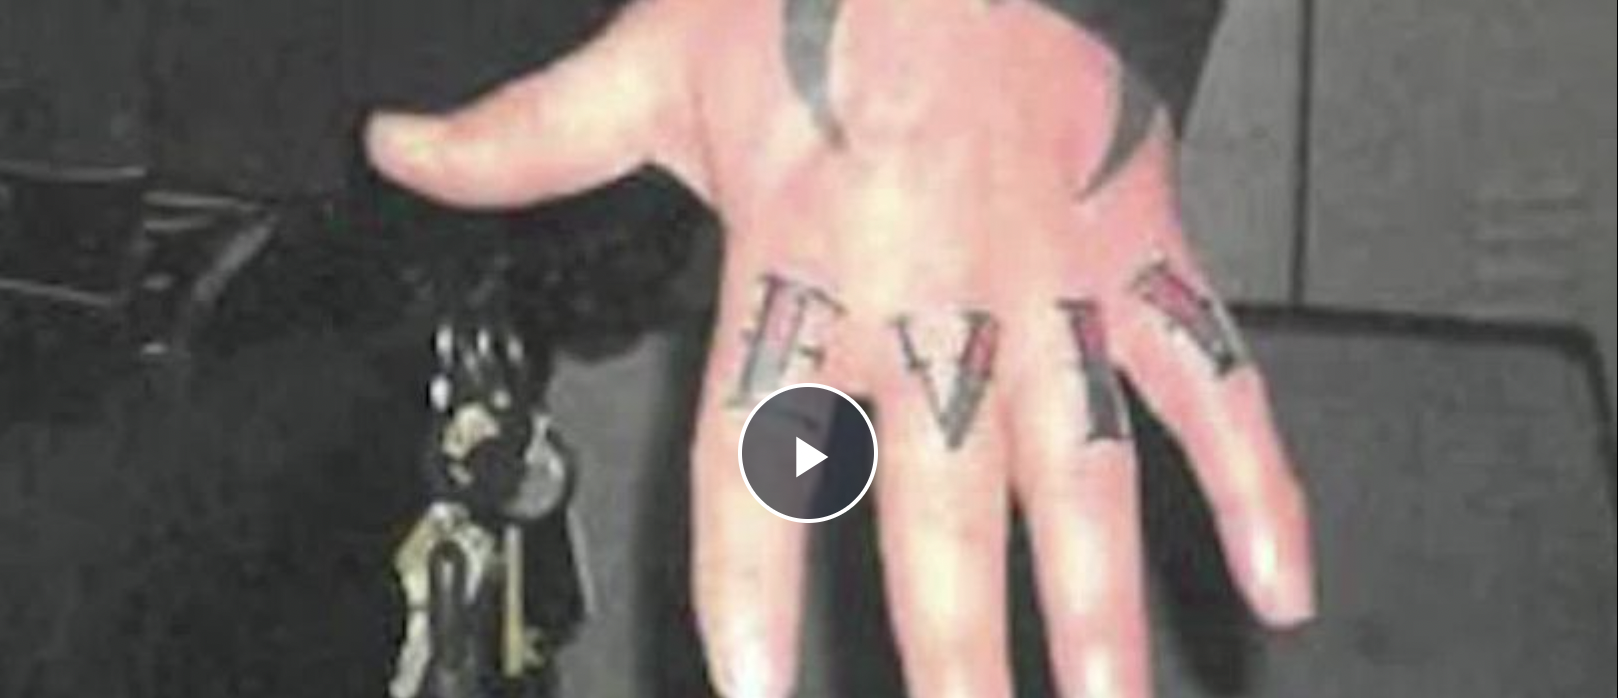 a-cop-got-fired-after-getting-the-phrase-“pure-evil”-tattooed-on-his-knuckles